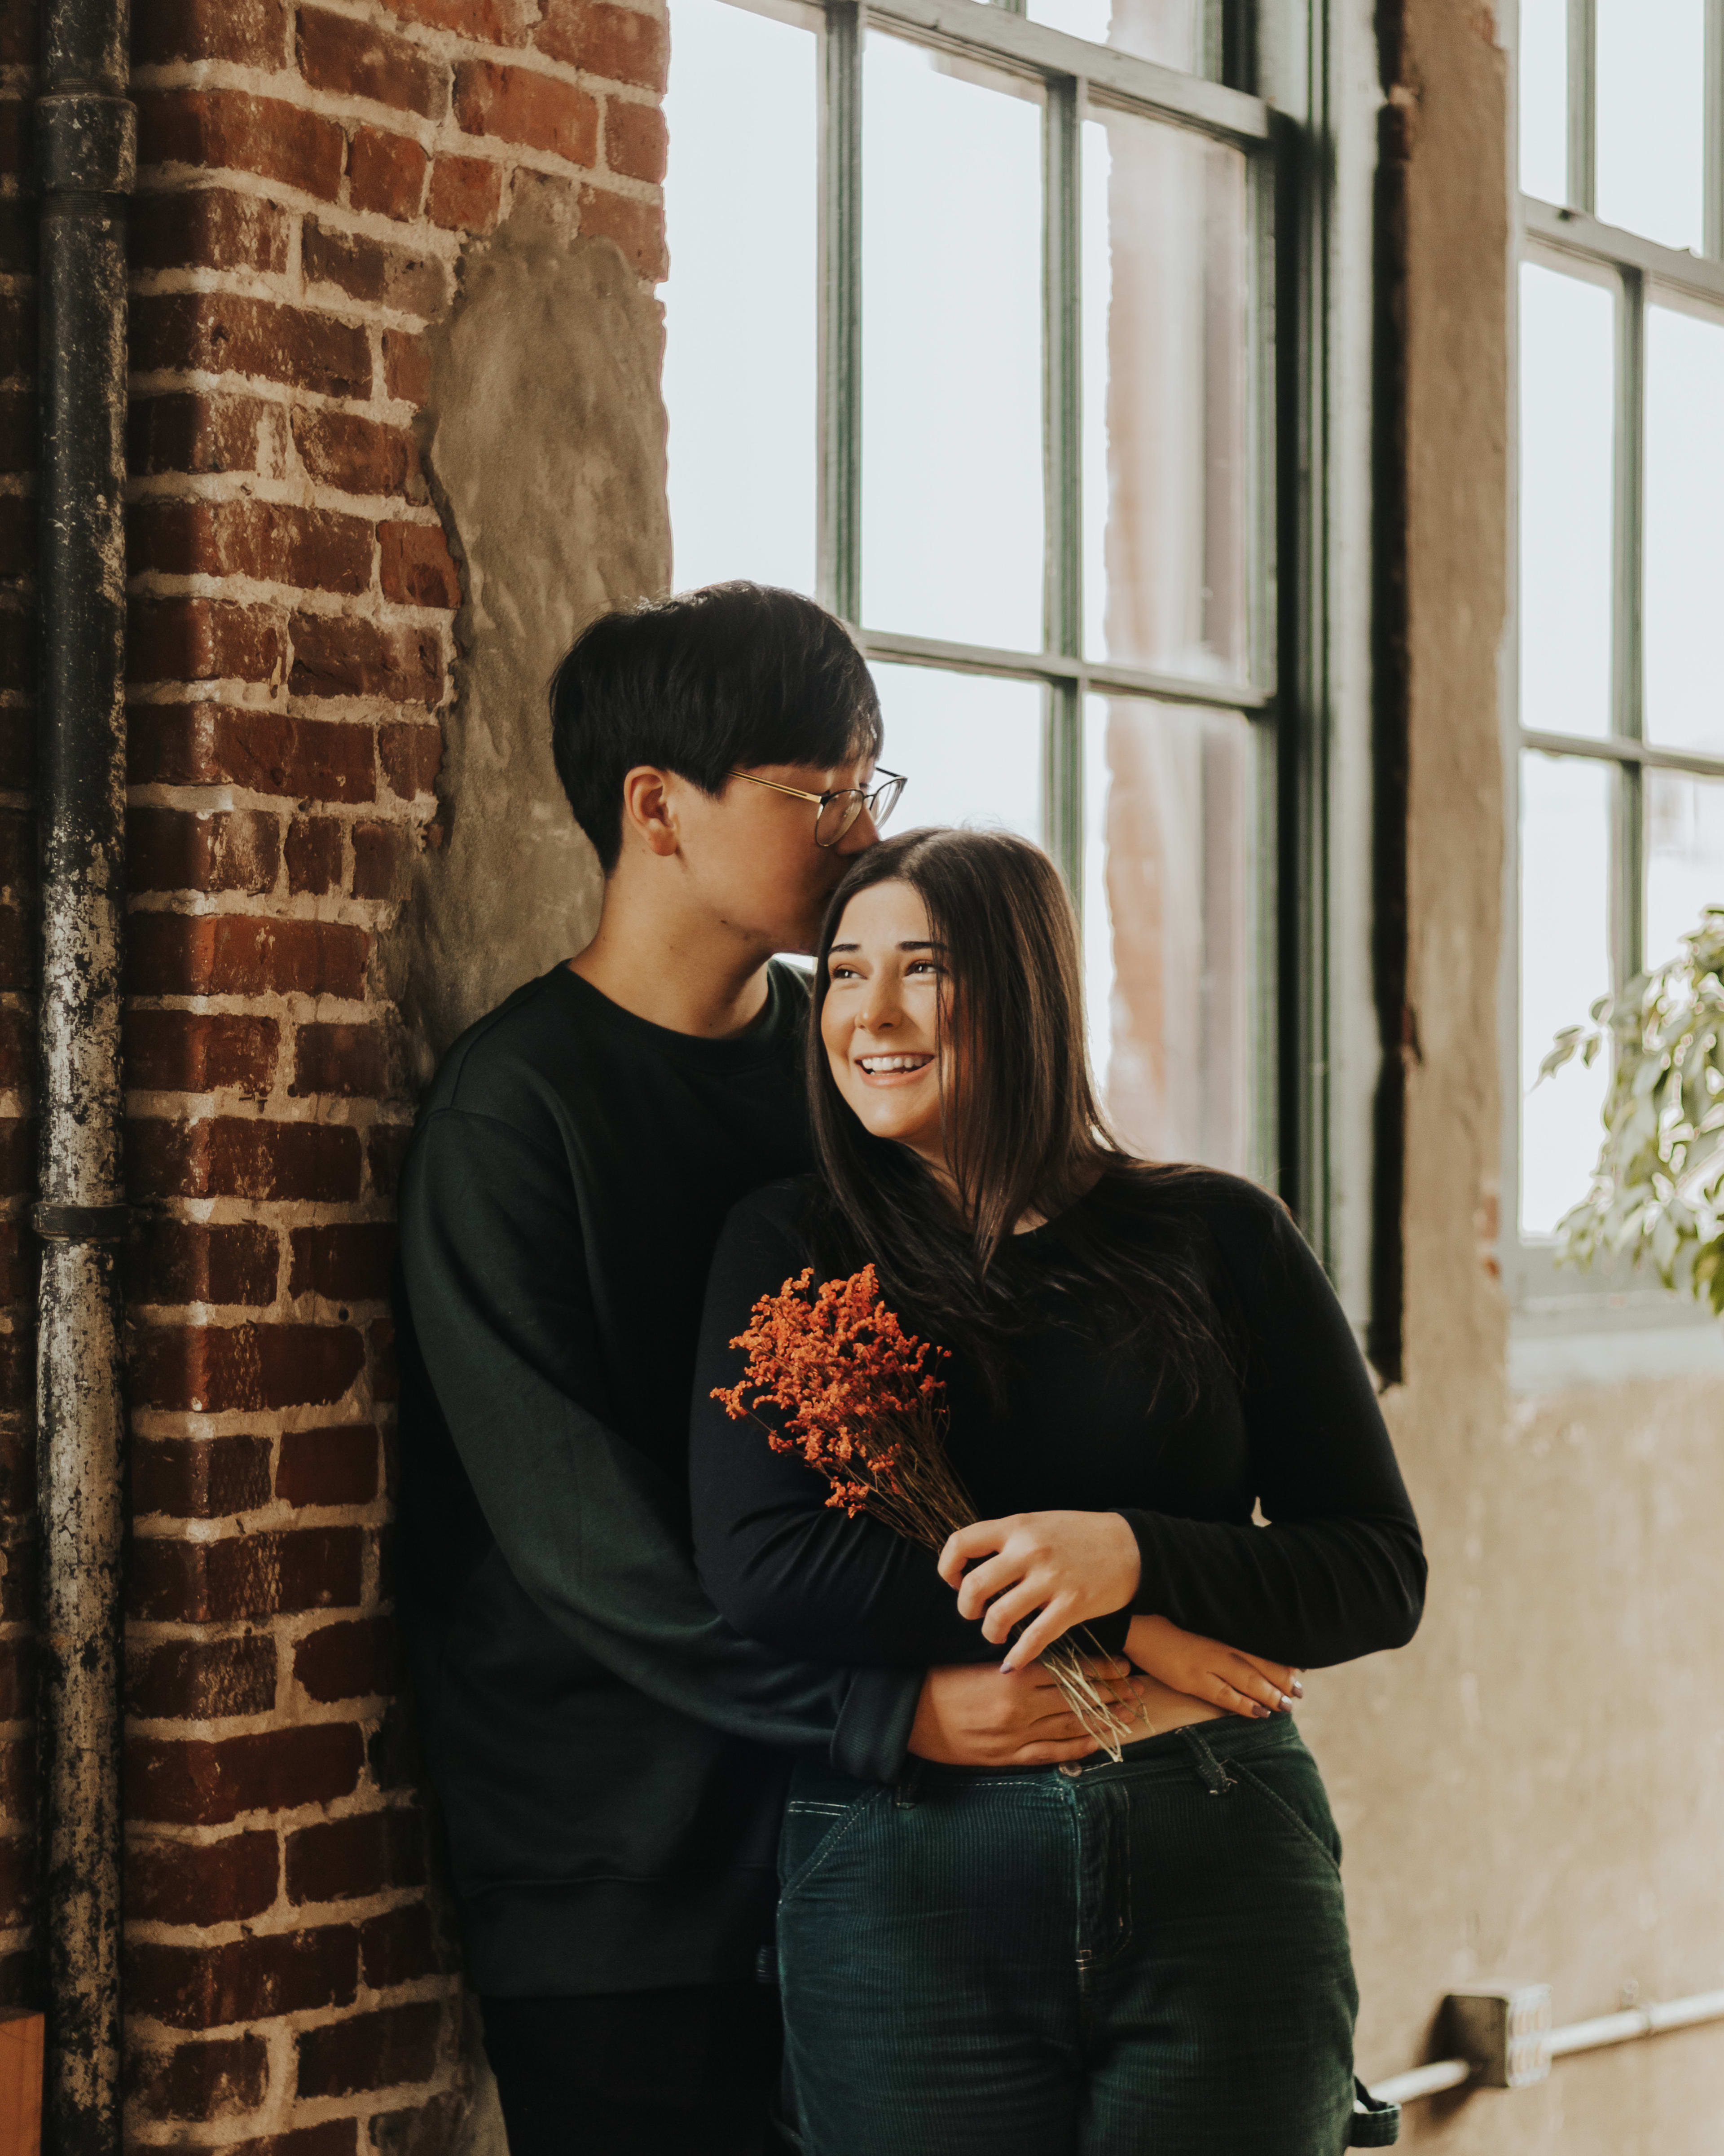 A couple posing near a brick wall during their rustic photoshoot.